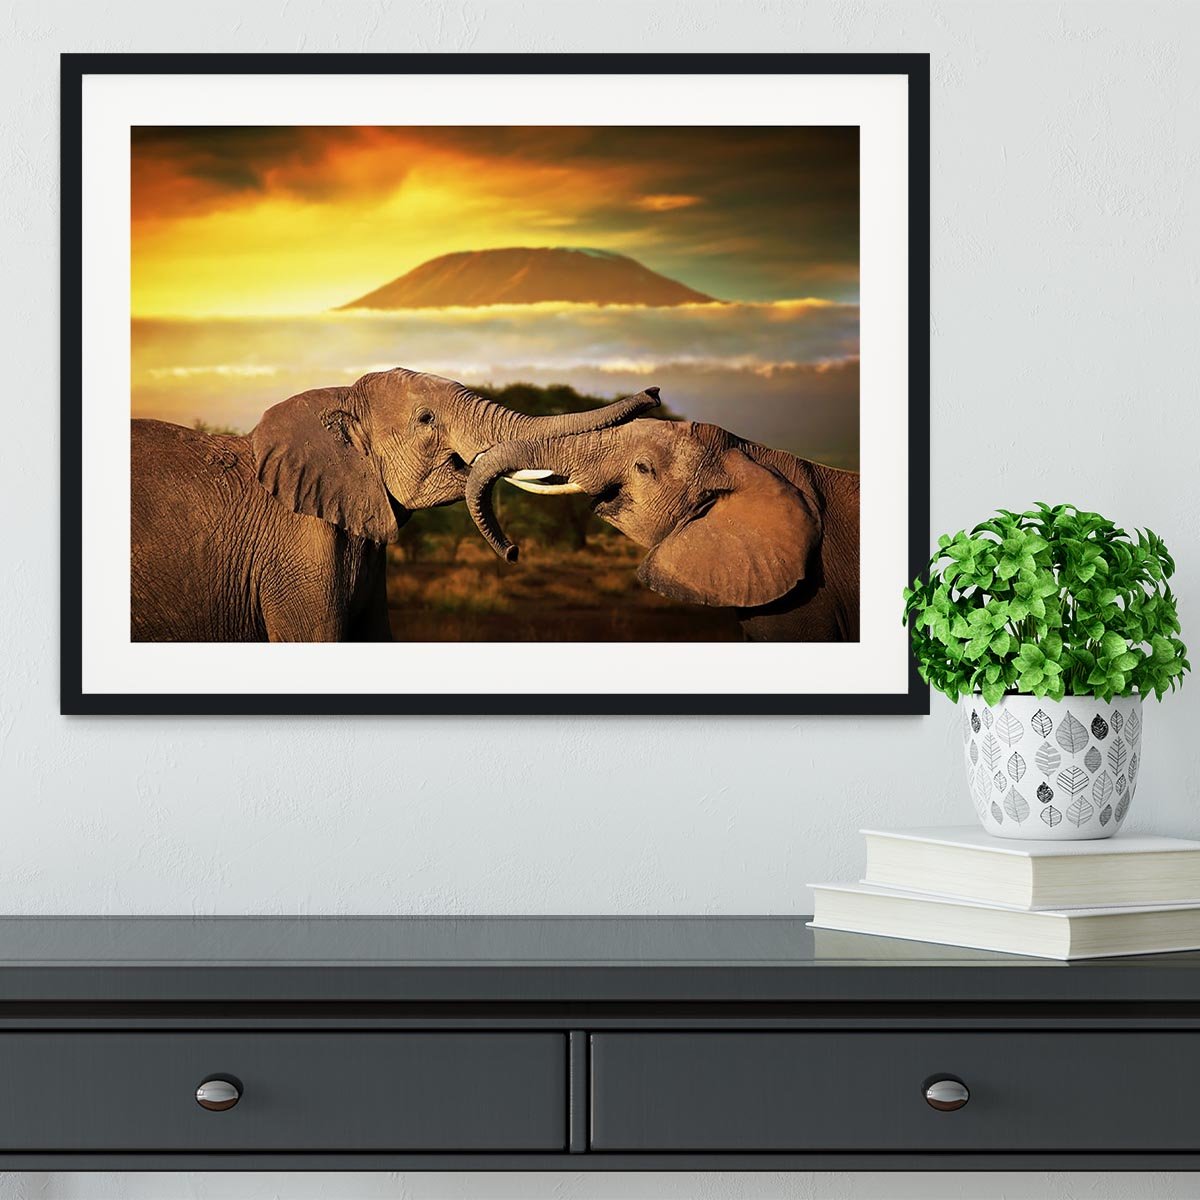 Elephants playing with their trunks Framed Print - Canvas Art Rocks - 1